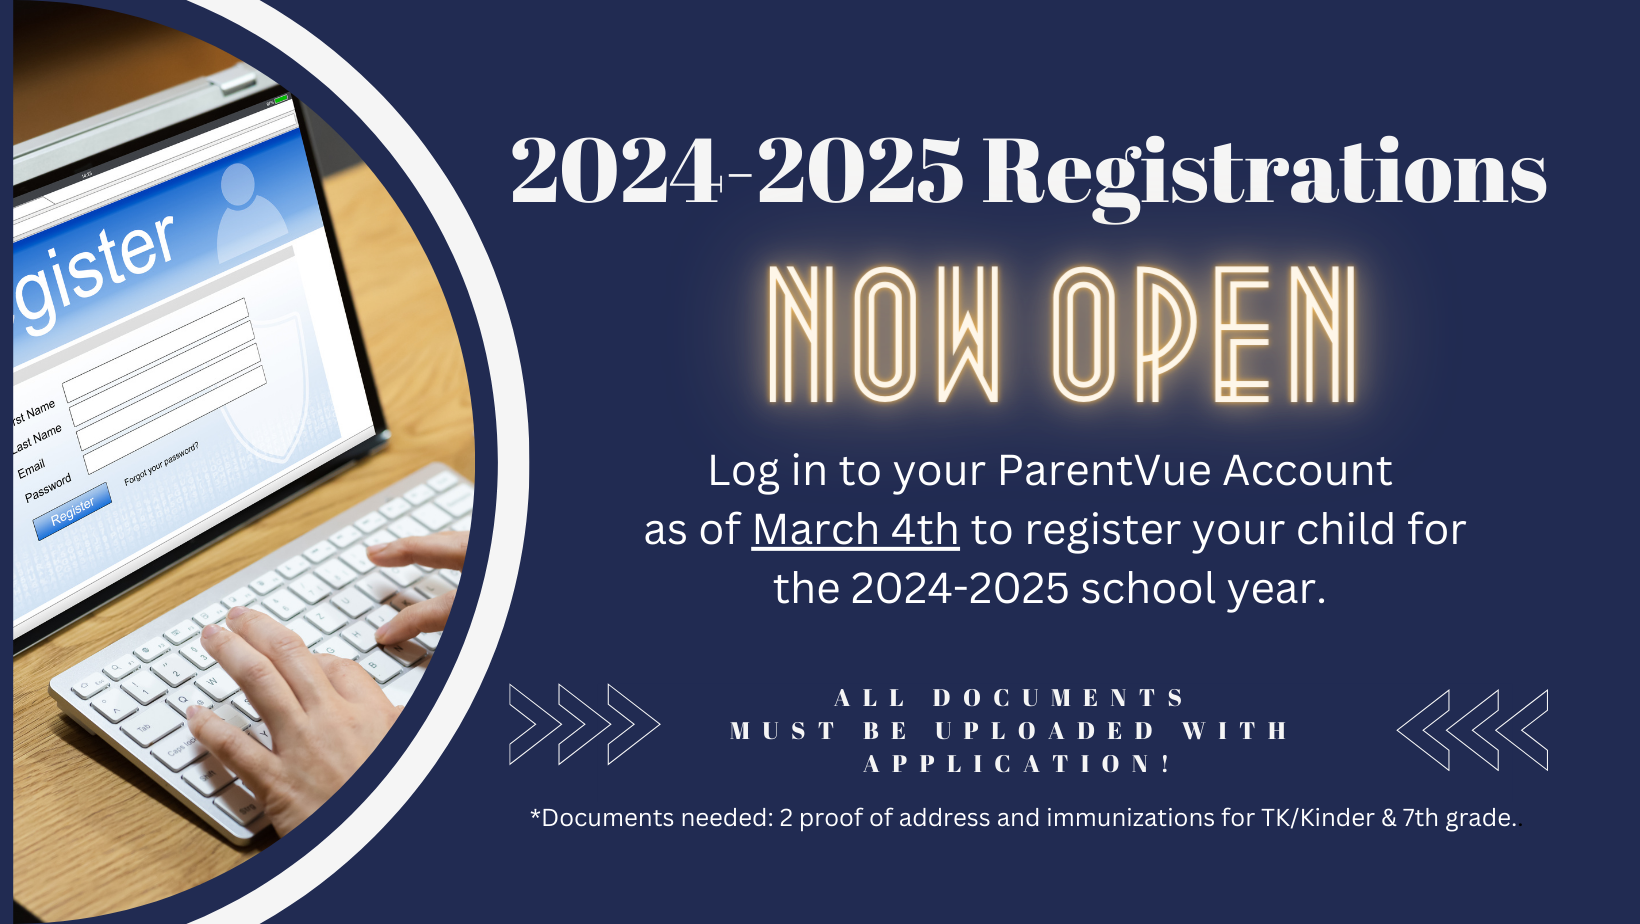 Registration for the 2024-2025 school year is now open. Log in to your ParentVue to start the process. For assitance contact the district at 760-337-6530 or by viewing help articles on our website www.hebersd.org